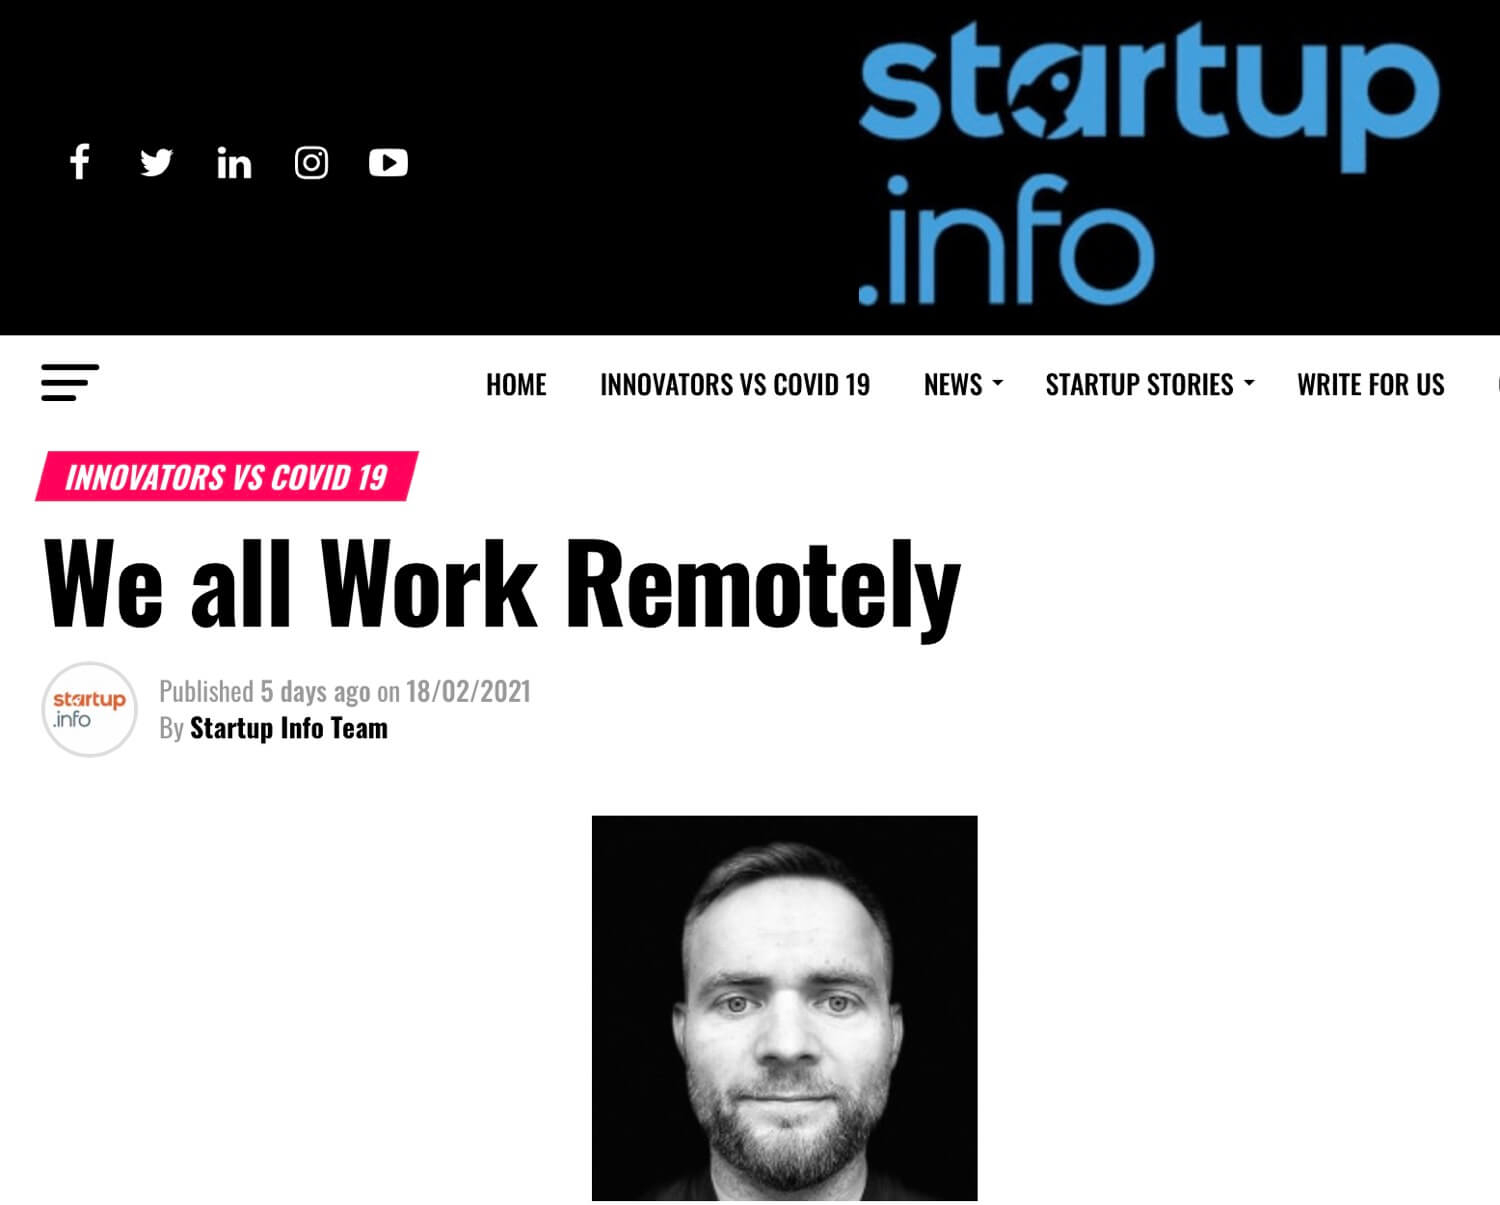 On Startup Info - how we all work remotely